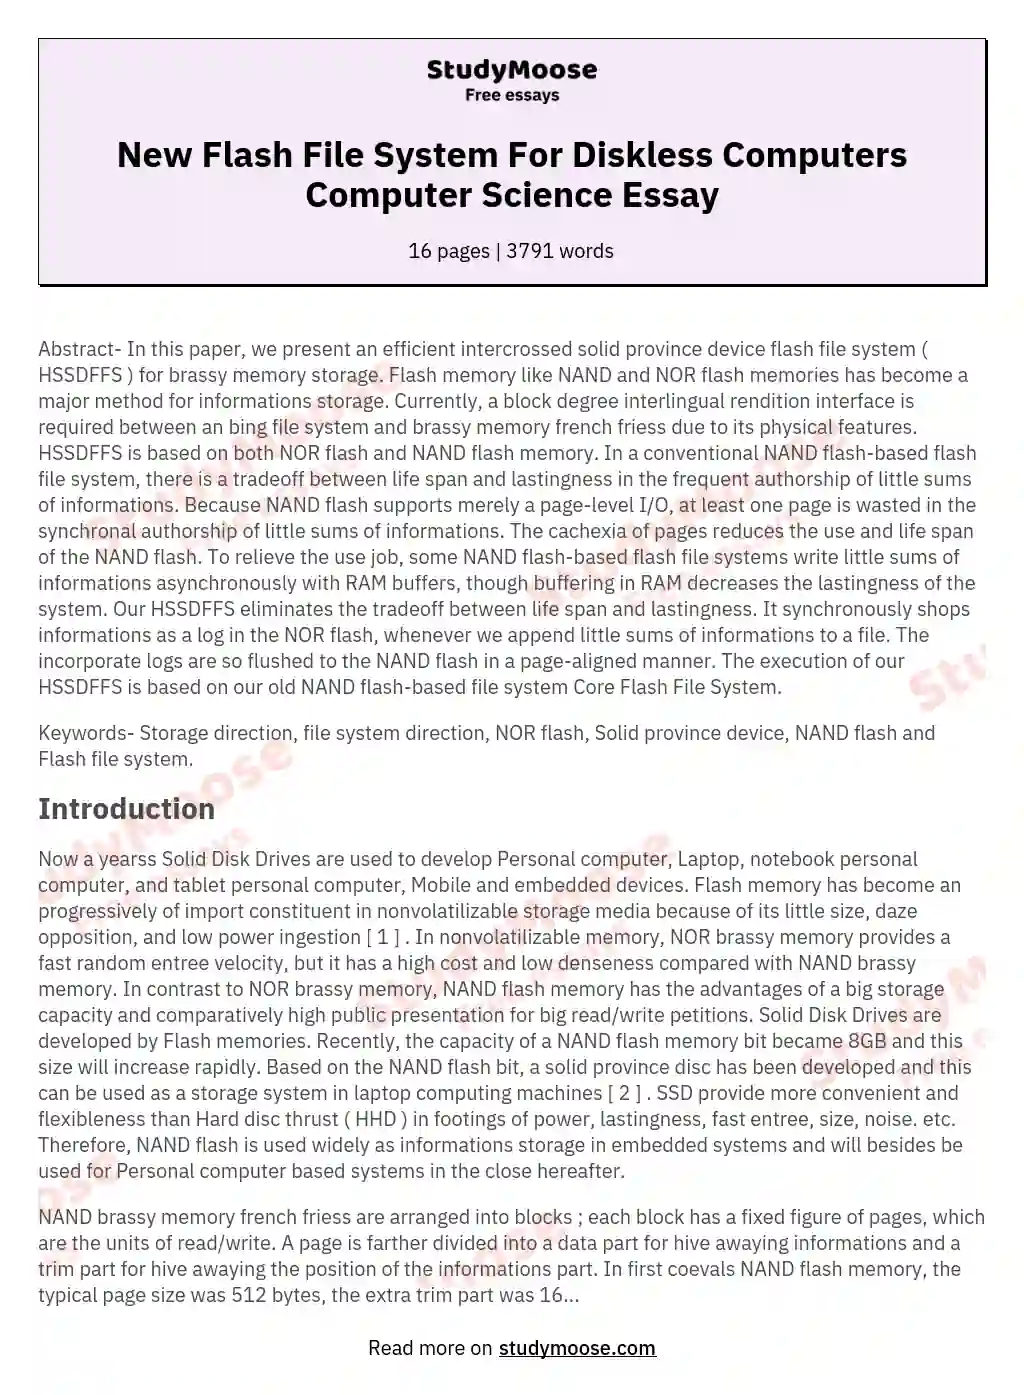 New Flash File System For Diskless Computers Computer Science Essay